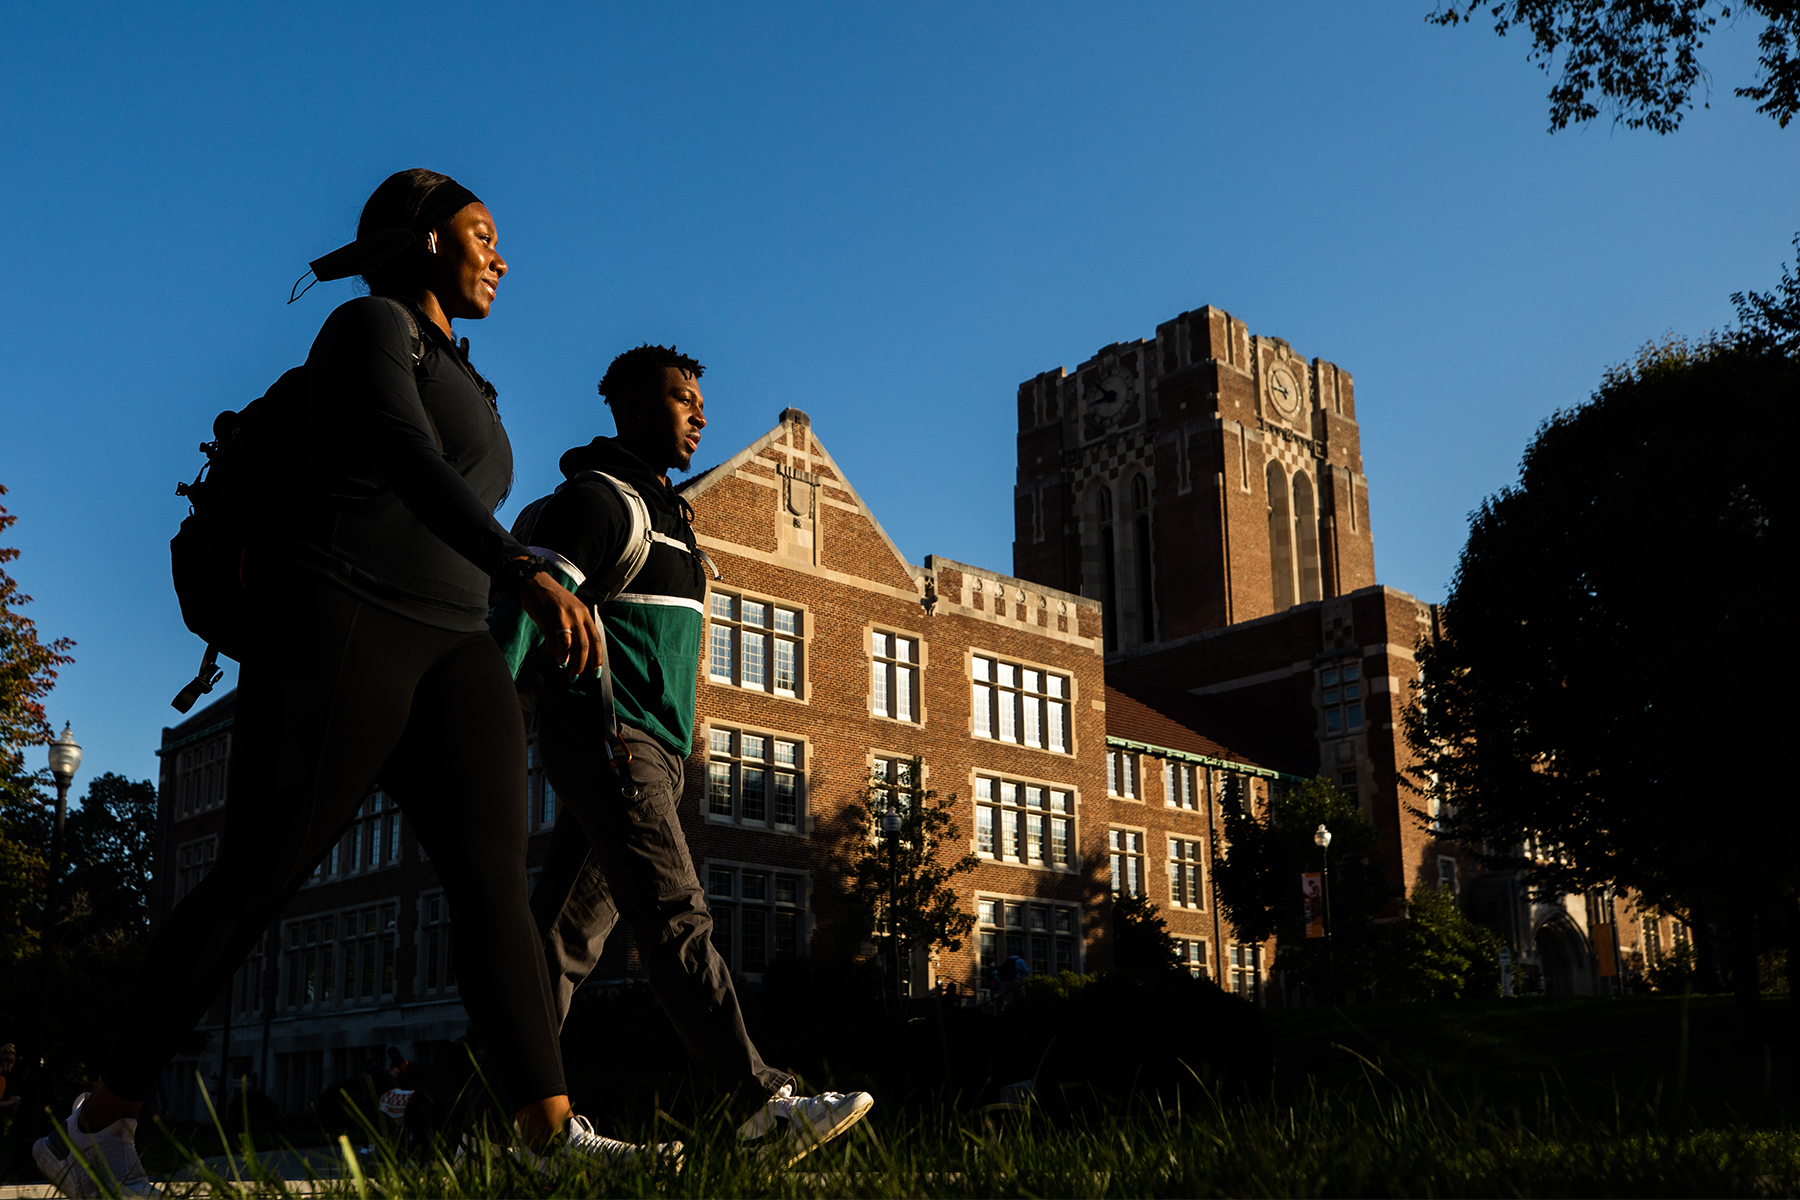 Students walk to class on the Hill with Ayres Hall in the background on September 27, 2021. Photo by Steven Bridges/University of Tennessee